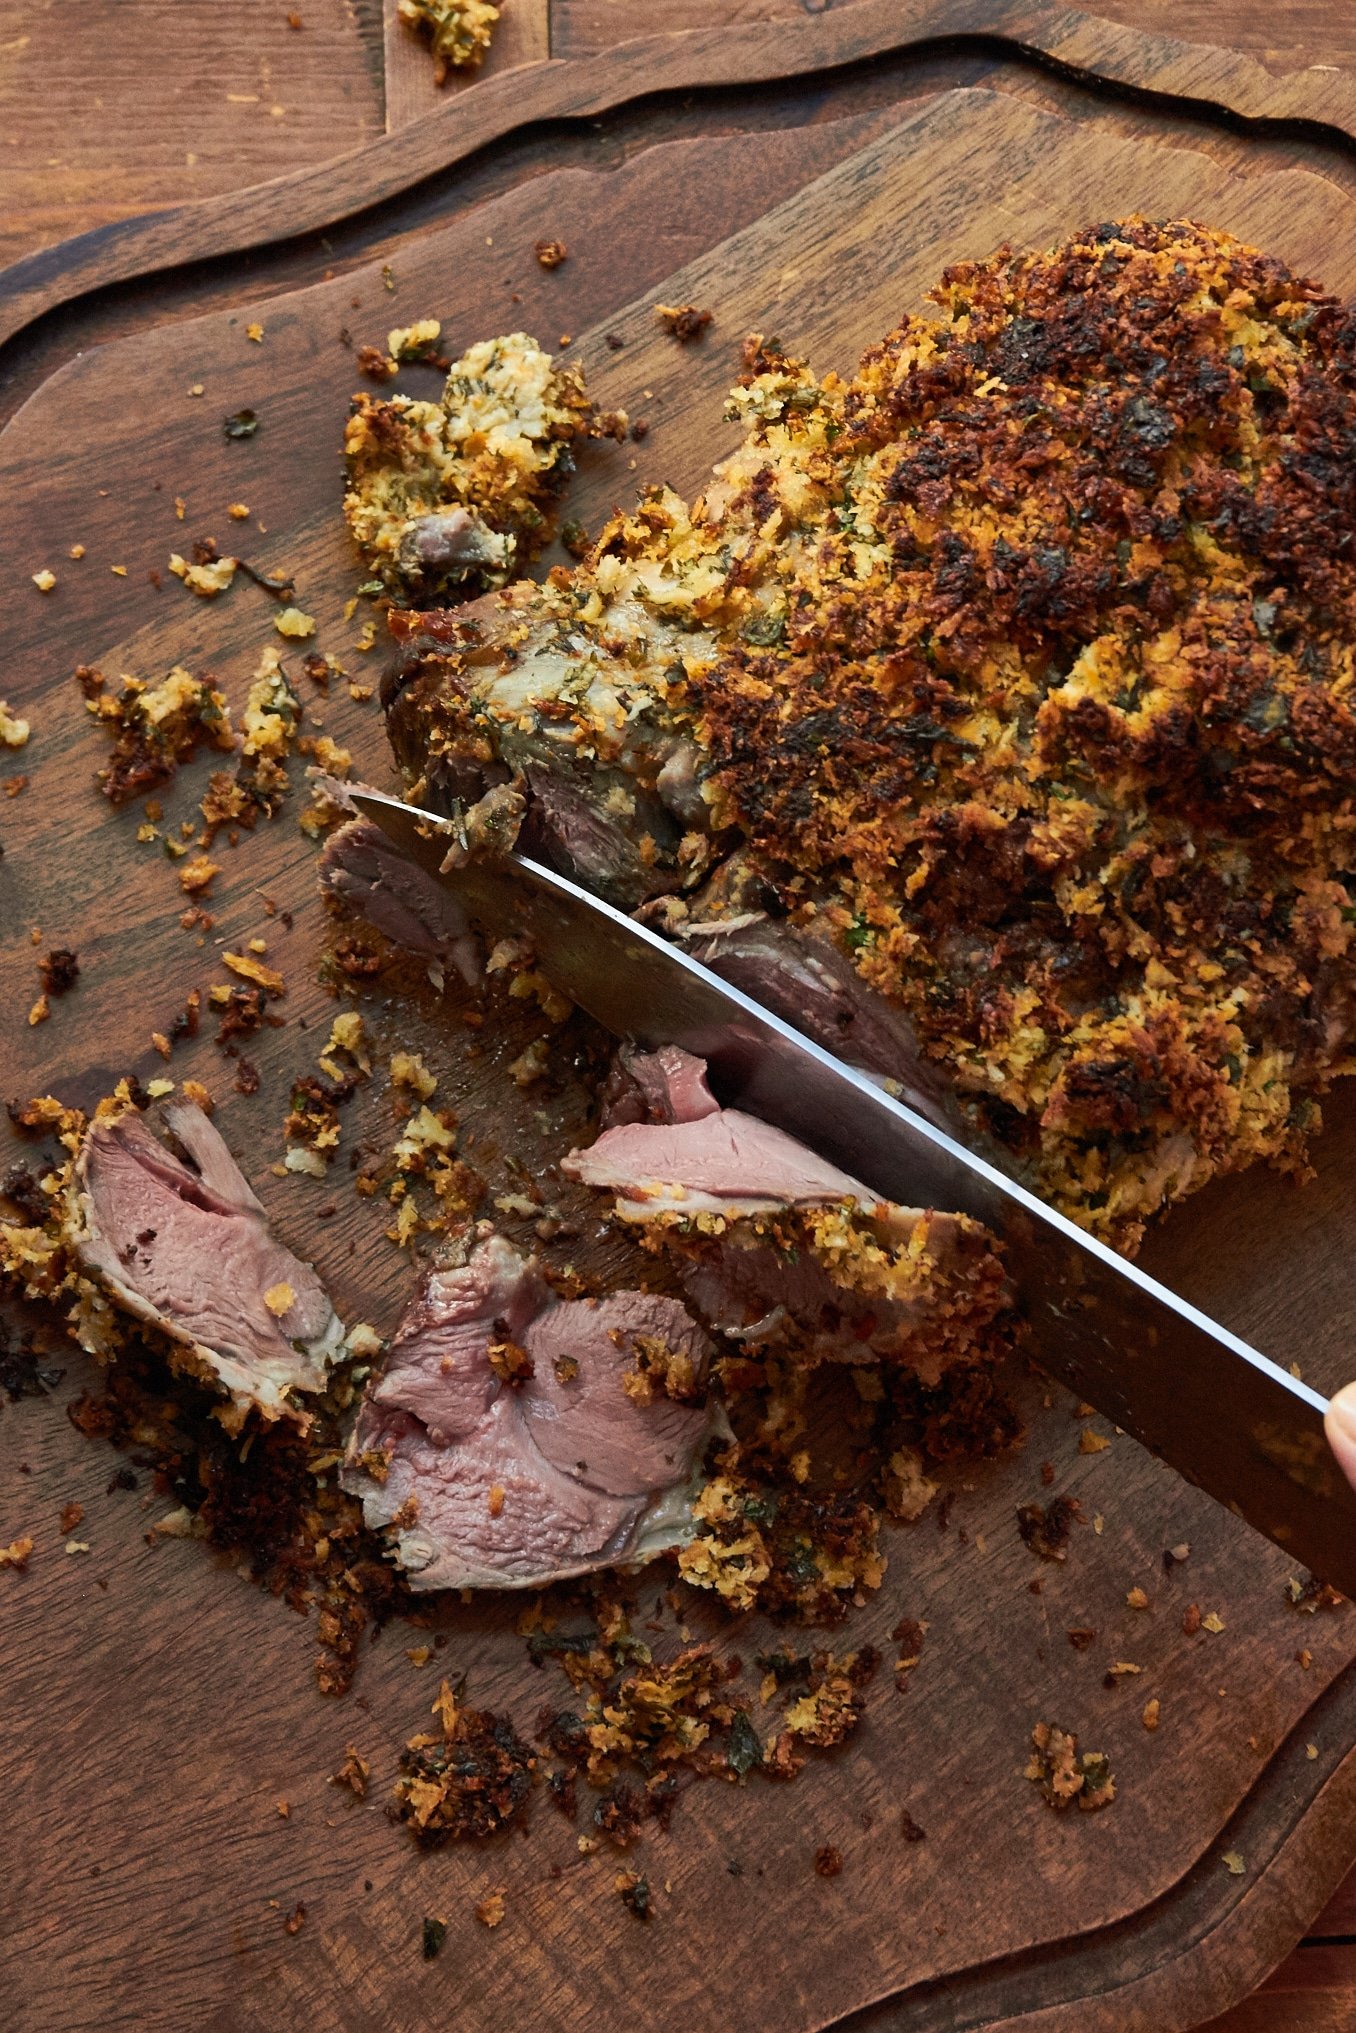 Herbed Boneless Leg of Lamb with Mustard Crust being sliced on a cutting board.